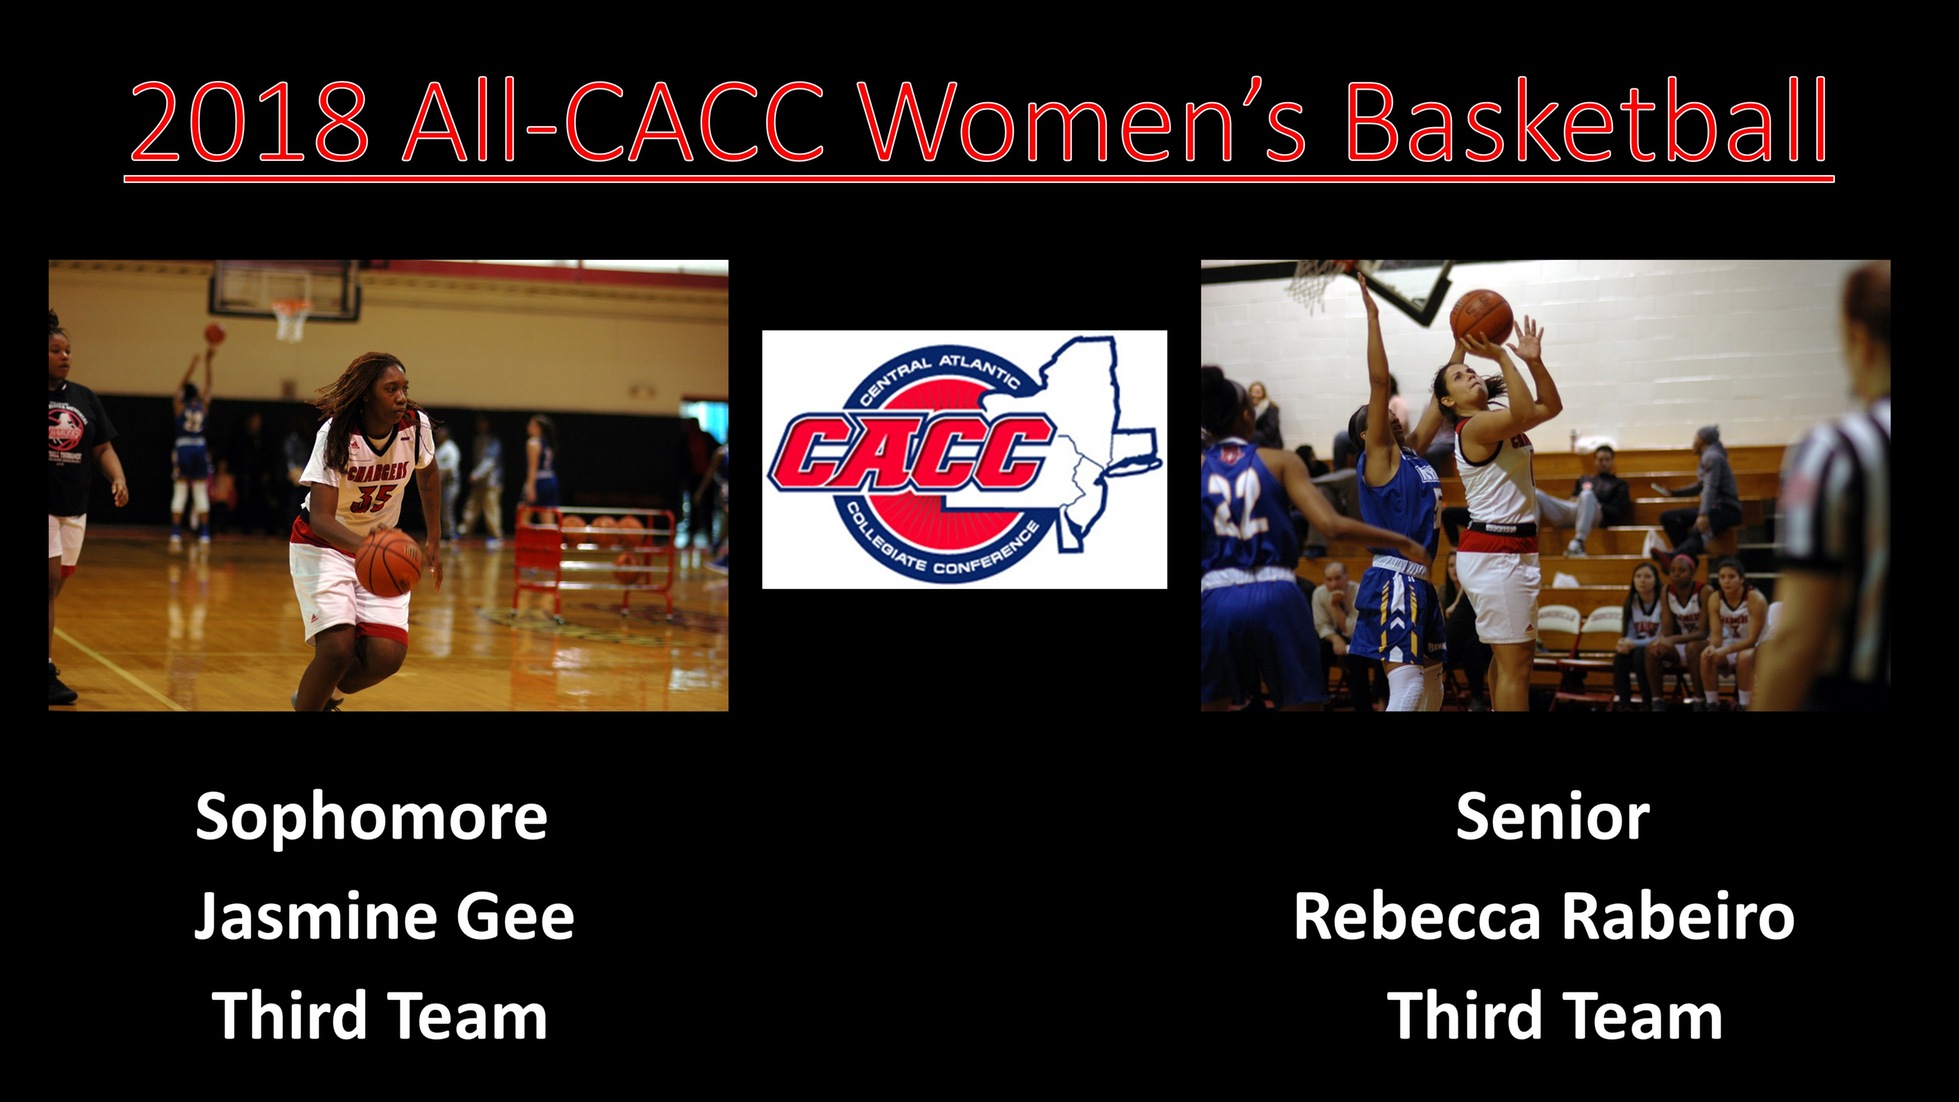 RABEIRO AND GEE EARN ALL-CACC WOMEN'S BASKETBALL HONORS